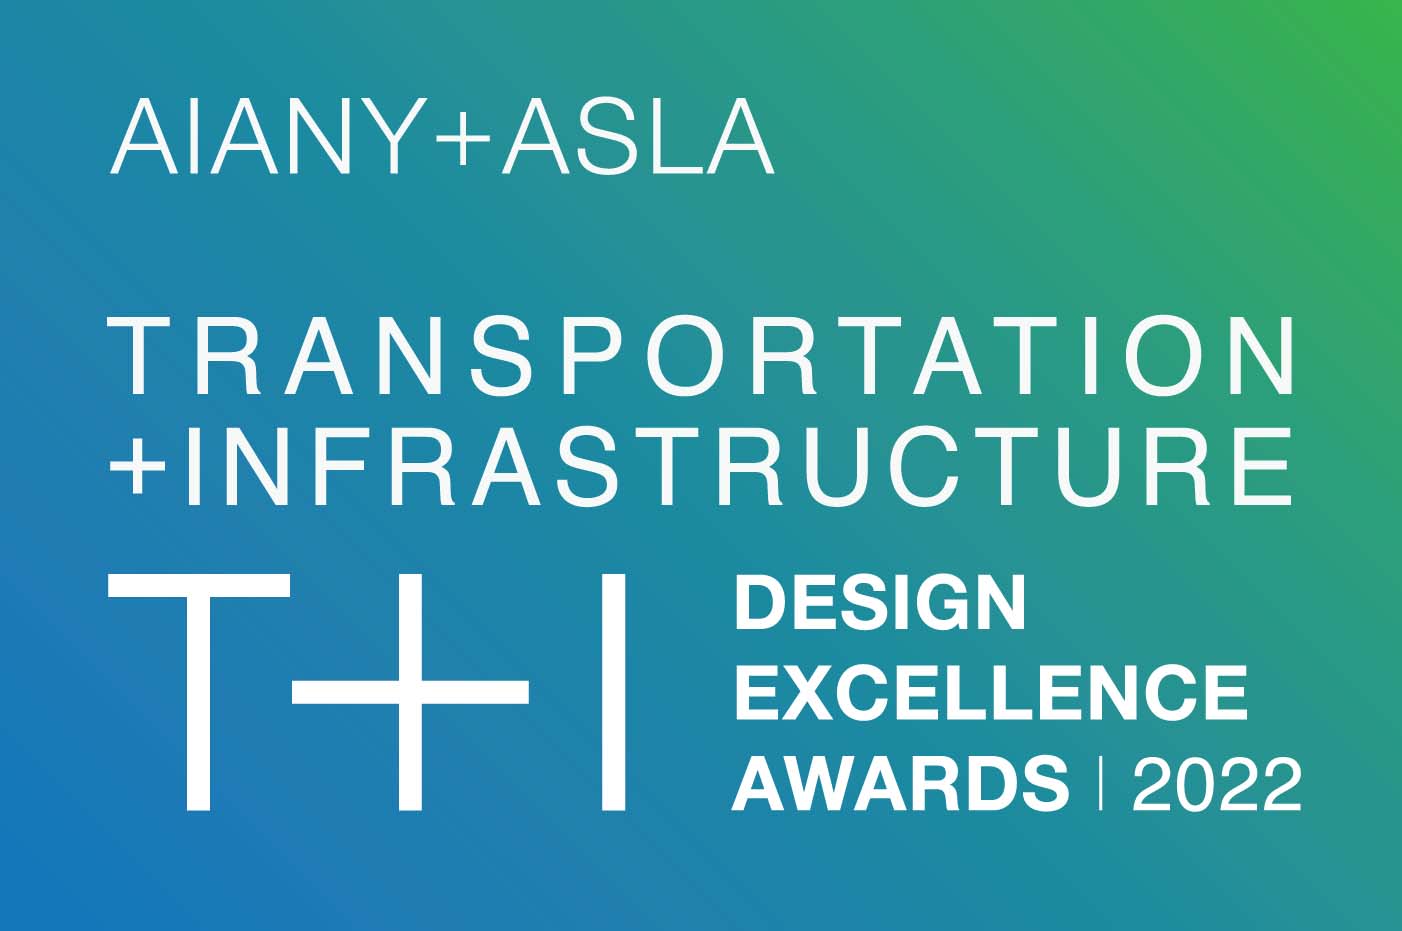 Decorative graphic for the 2022 Transportation and Infrastructure Design Excellence Awards